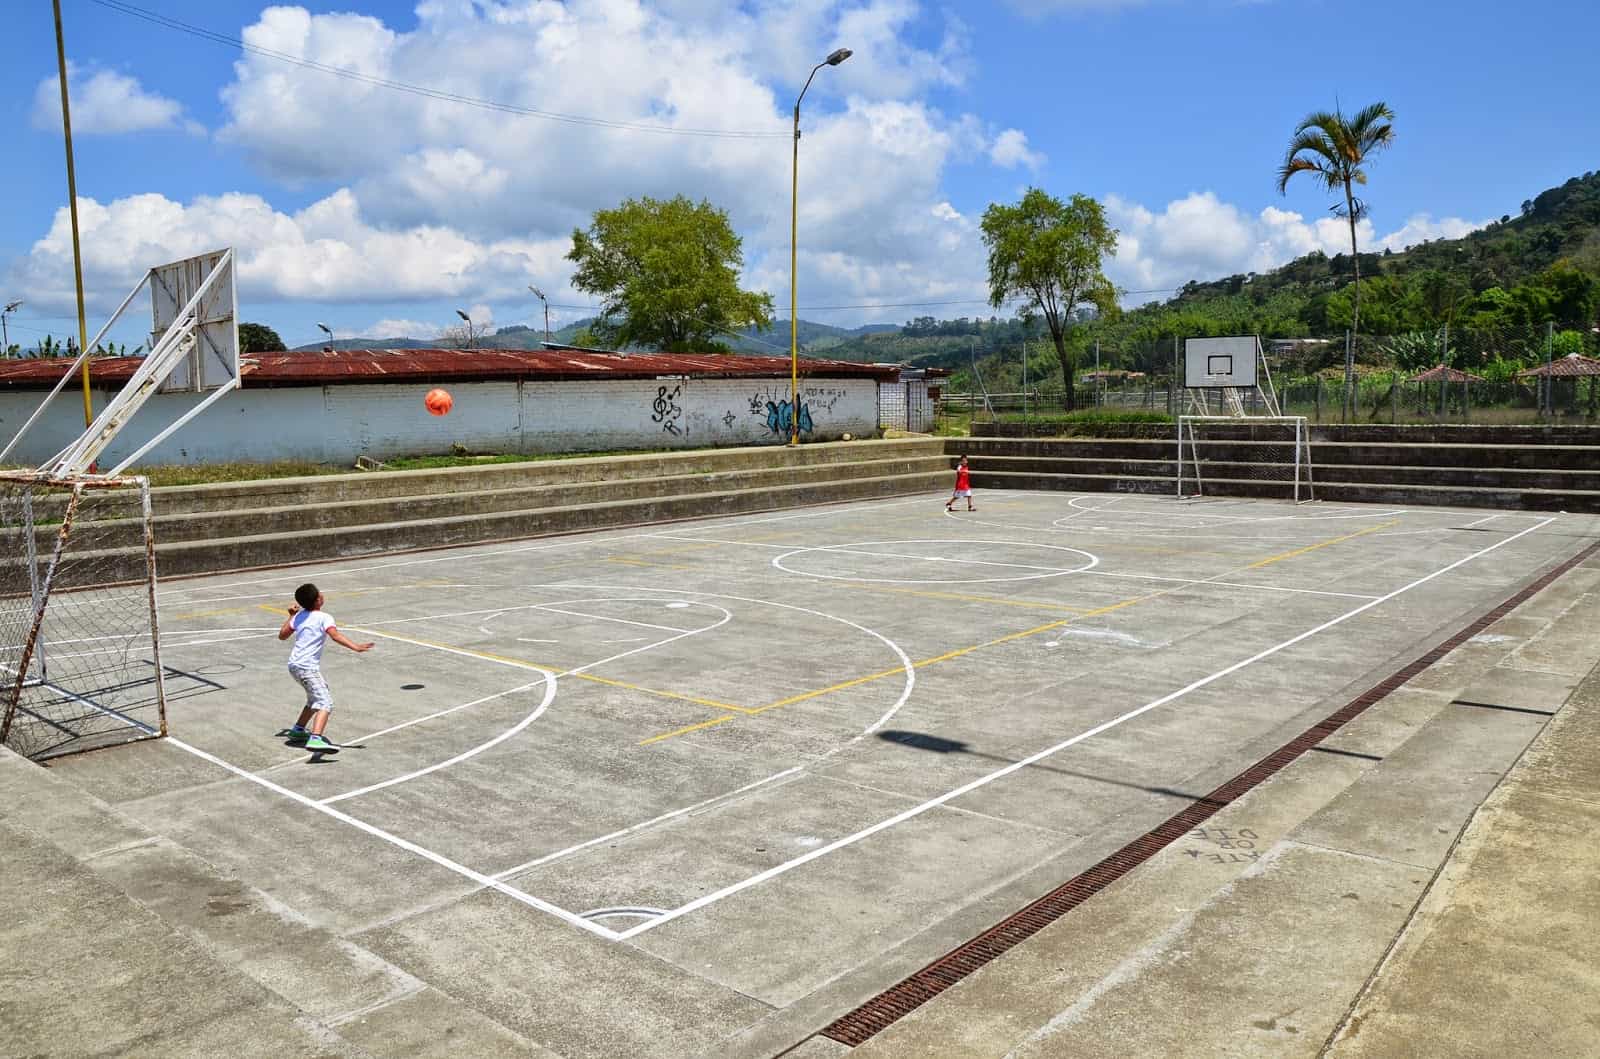 Basketball court in Anserma, Caldas, Colombia